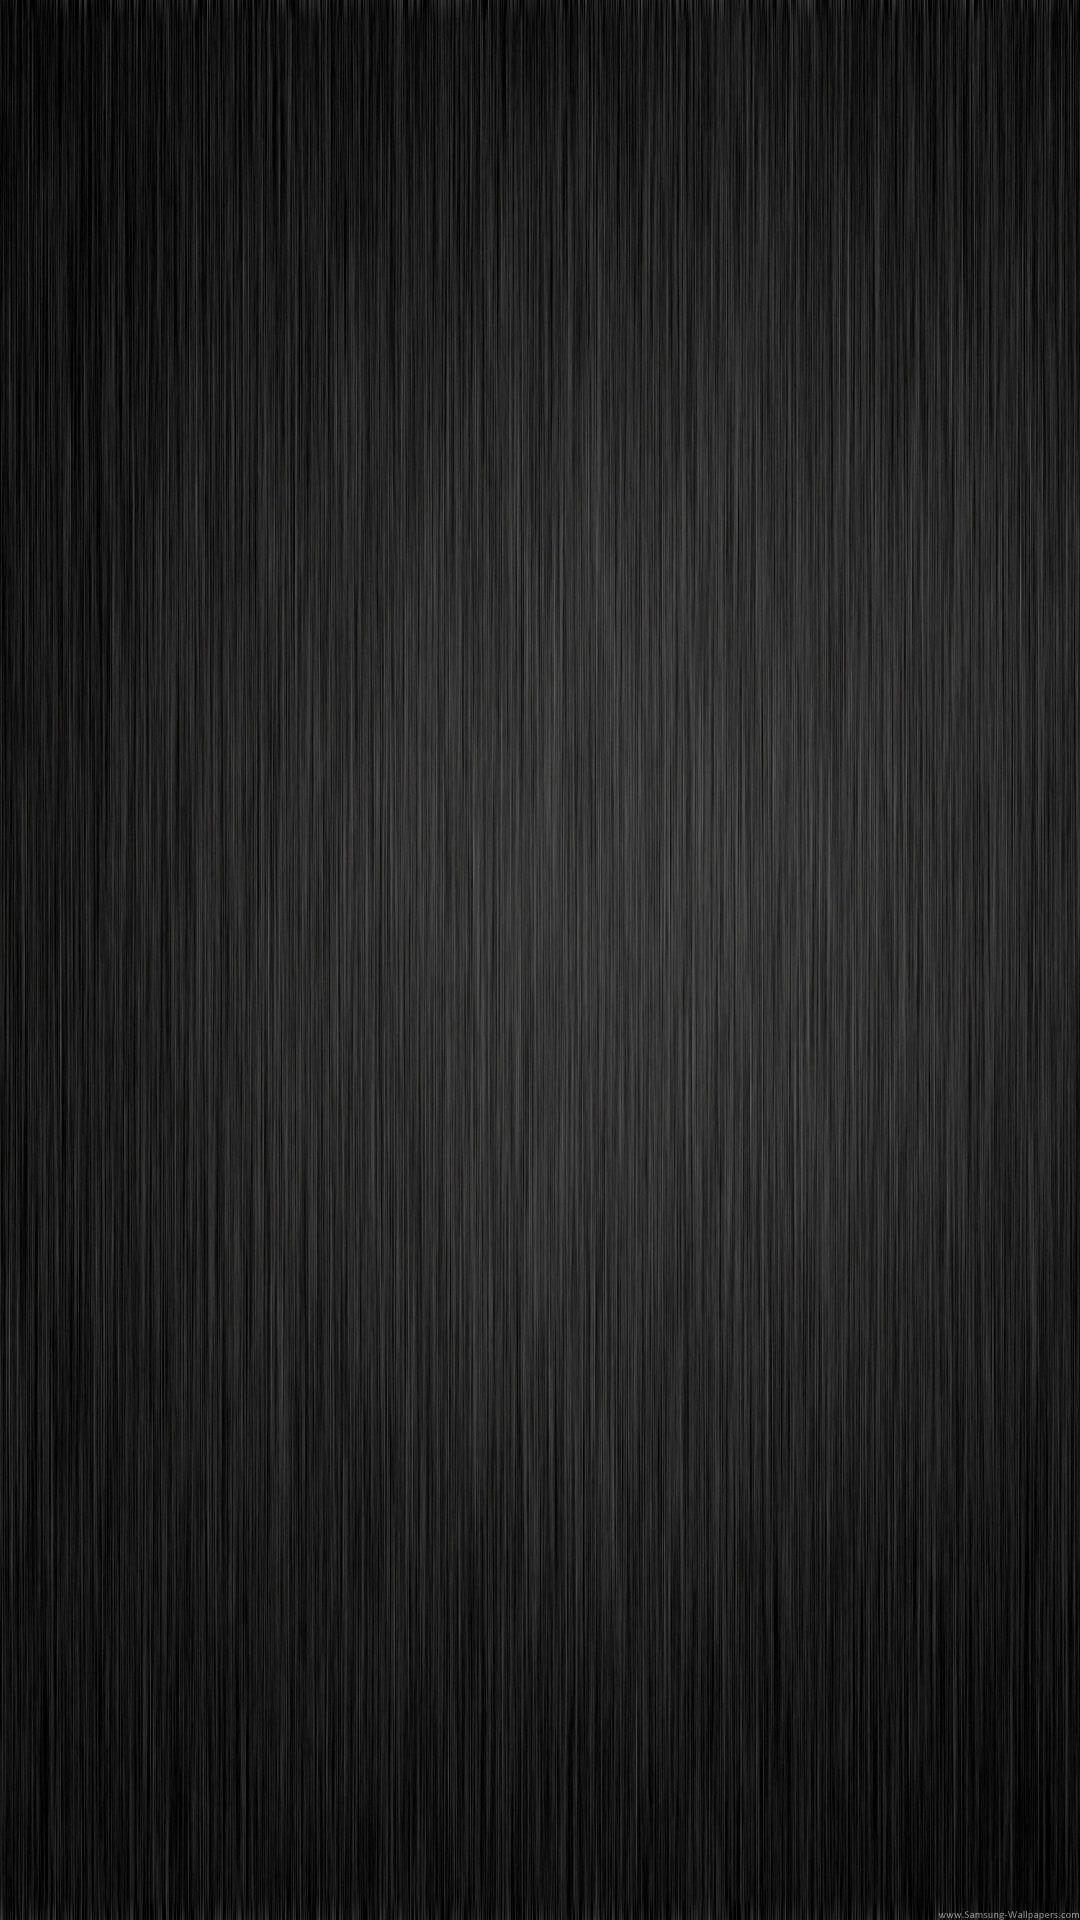 Best Android Wallpaper 2019: Black Wallpaper for Android